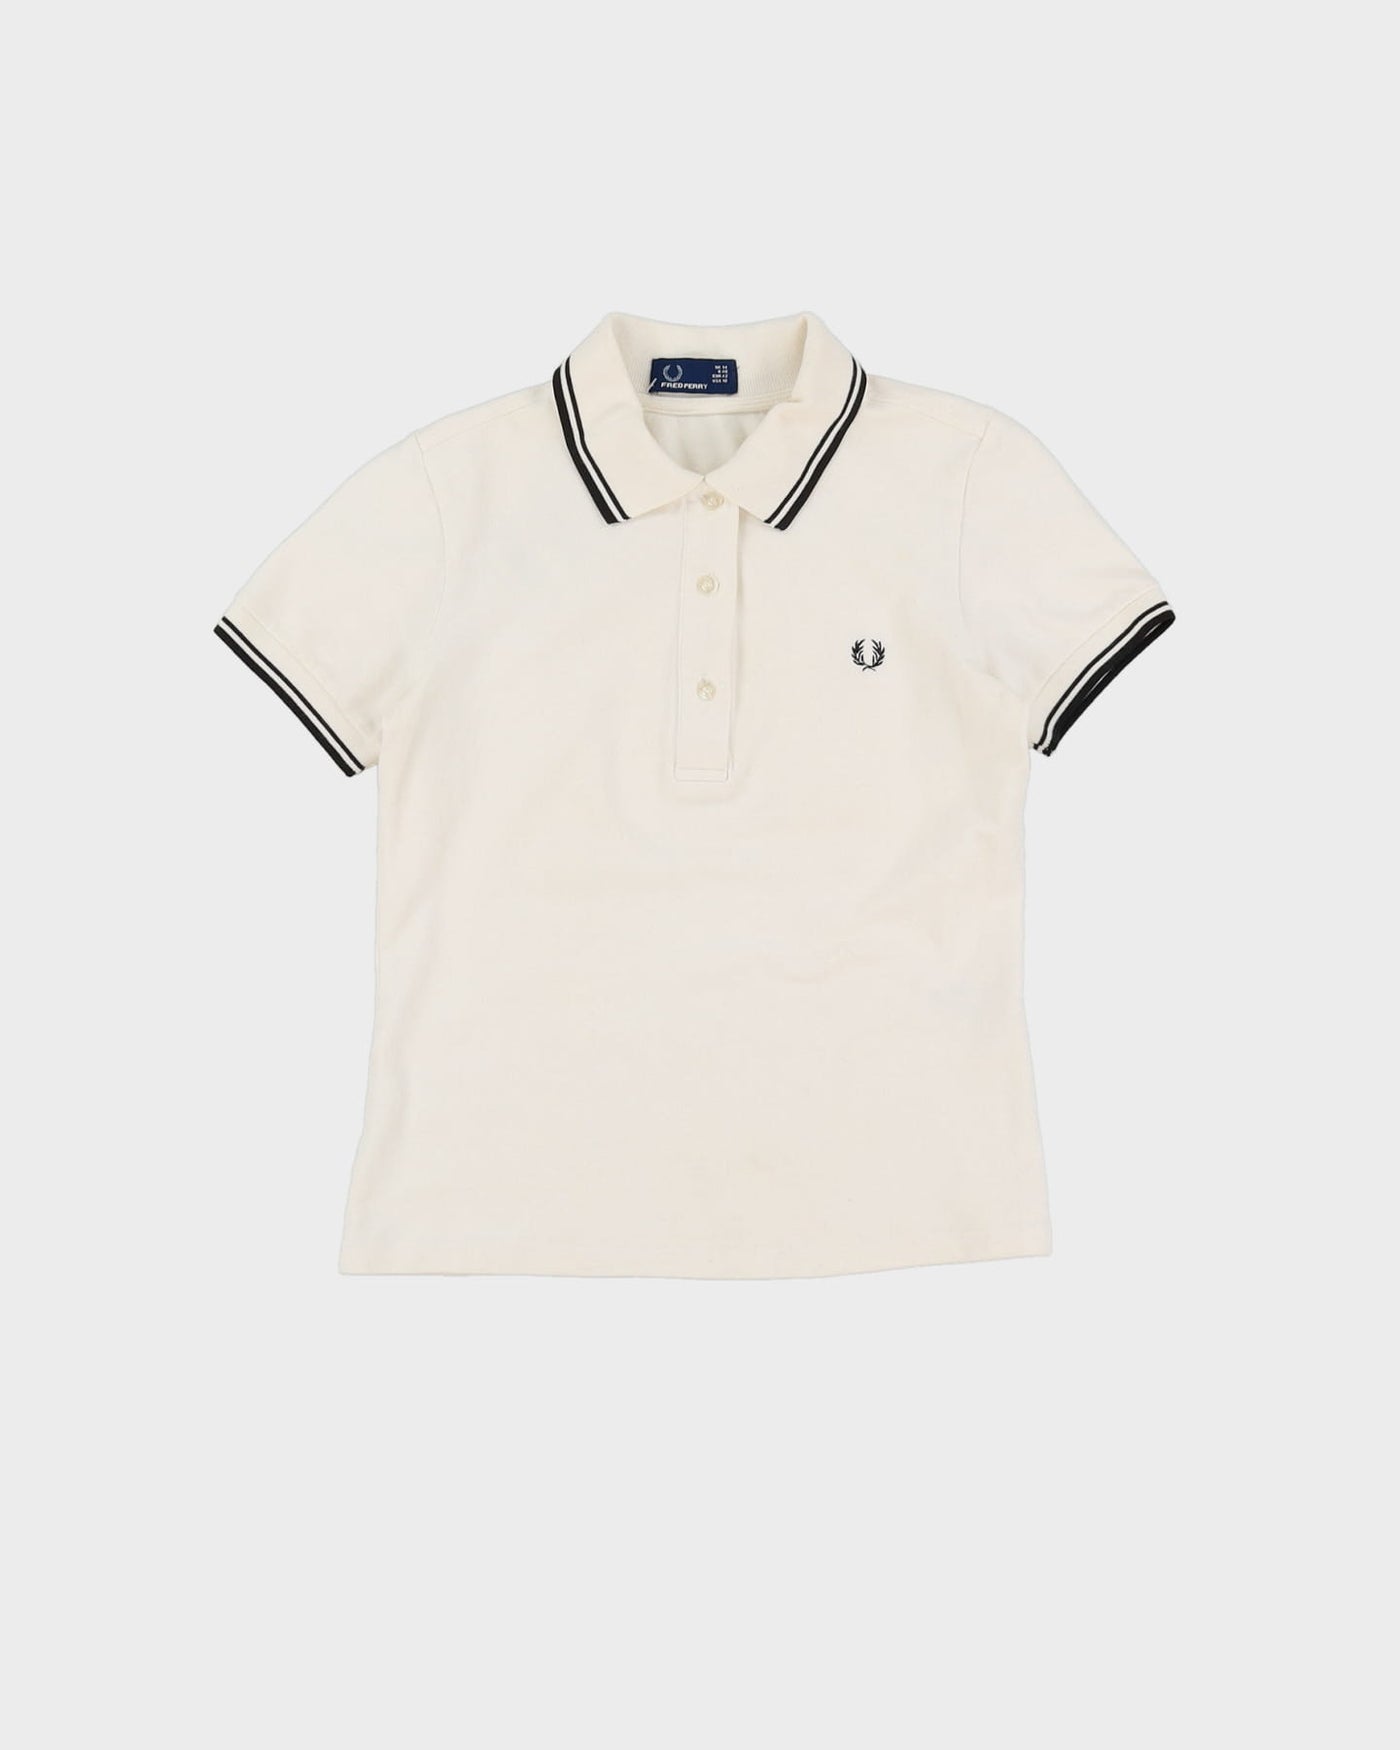 00s Fred Perry White Baby Fit Polo T-Shirt - M